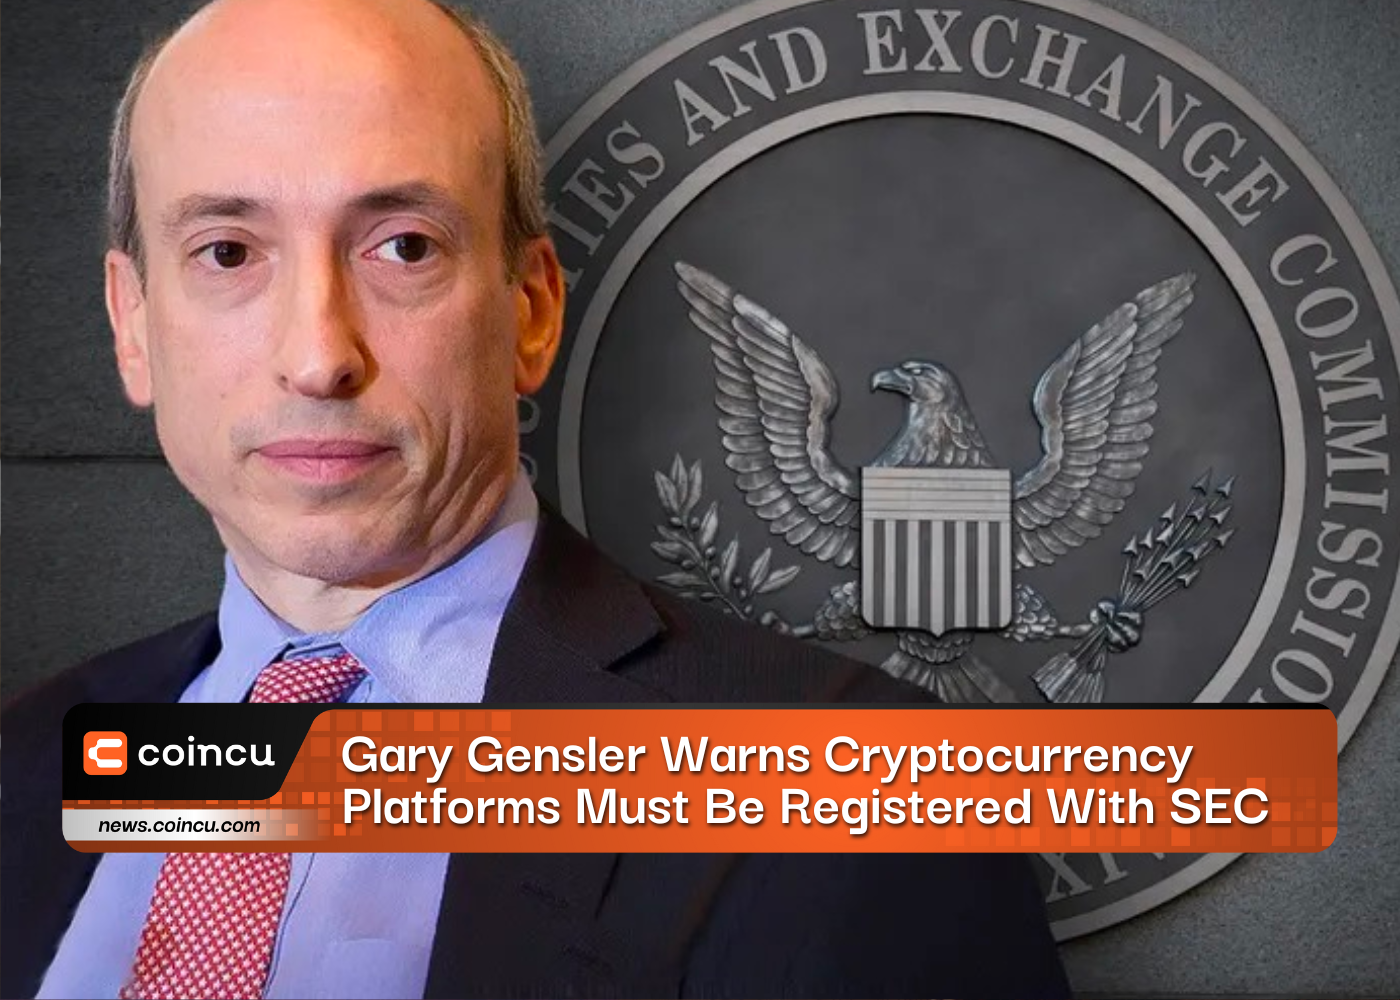 Gary Gensler Warns Cryptocurrency Platforms Must Be Registered With SEC